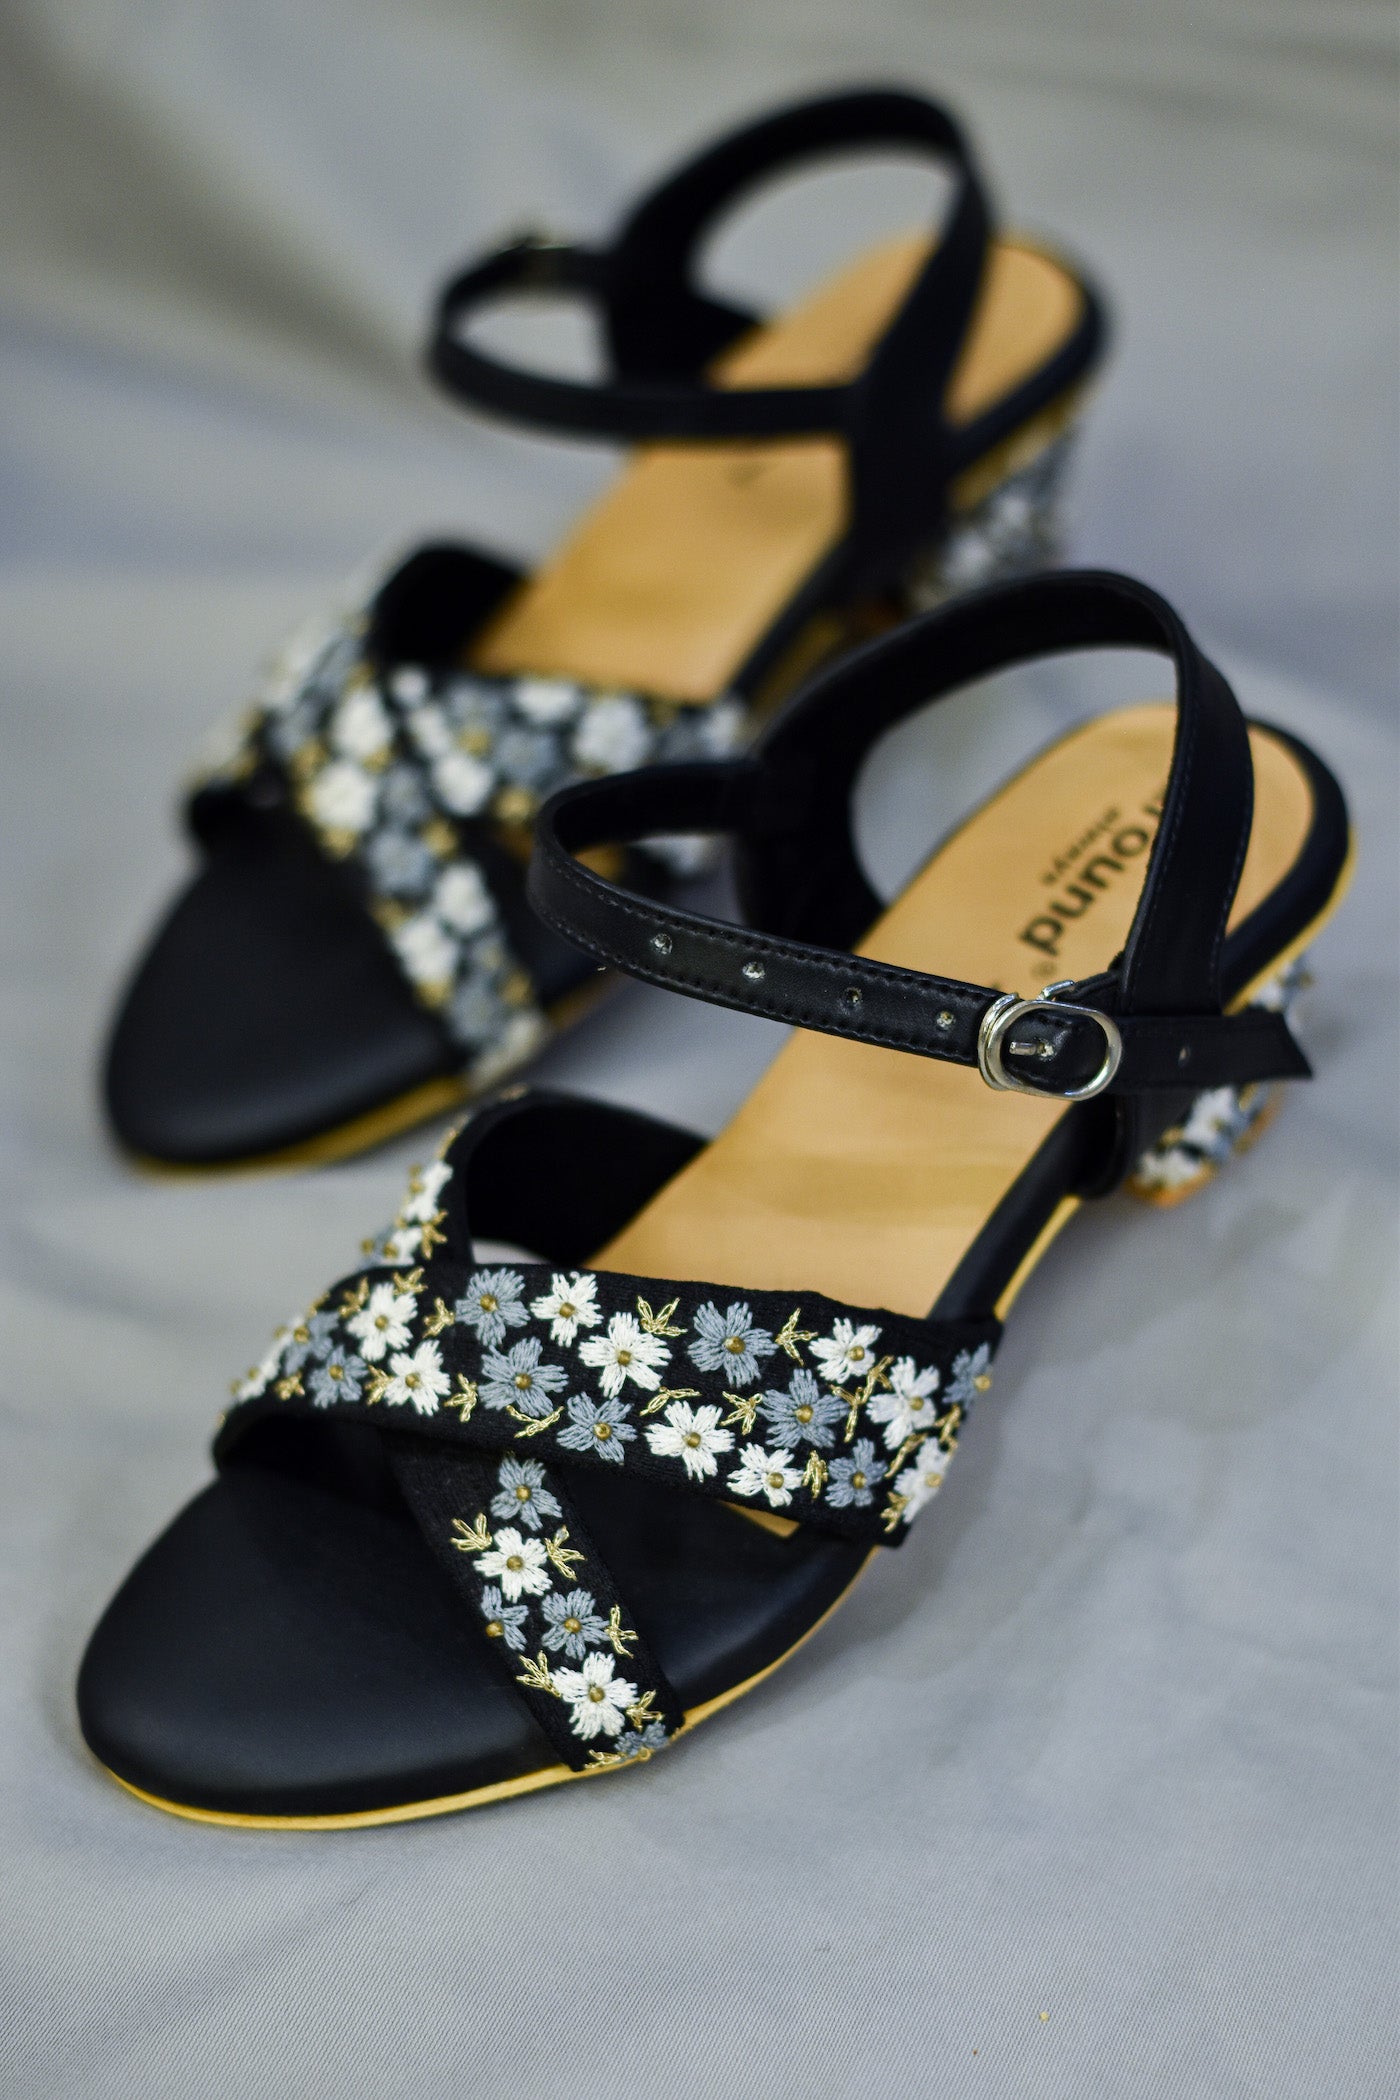 Stylish black party sandals with ankle strap